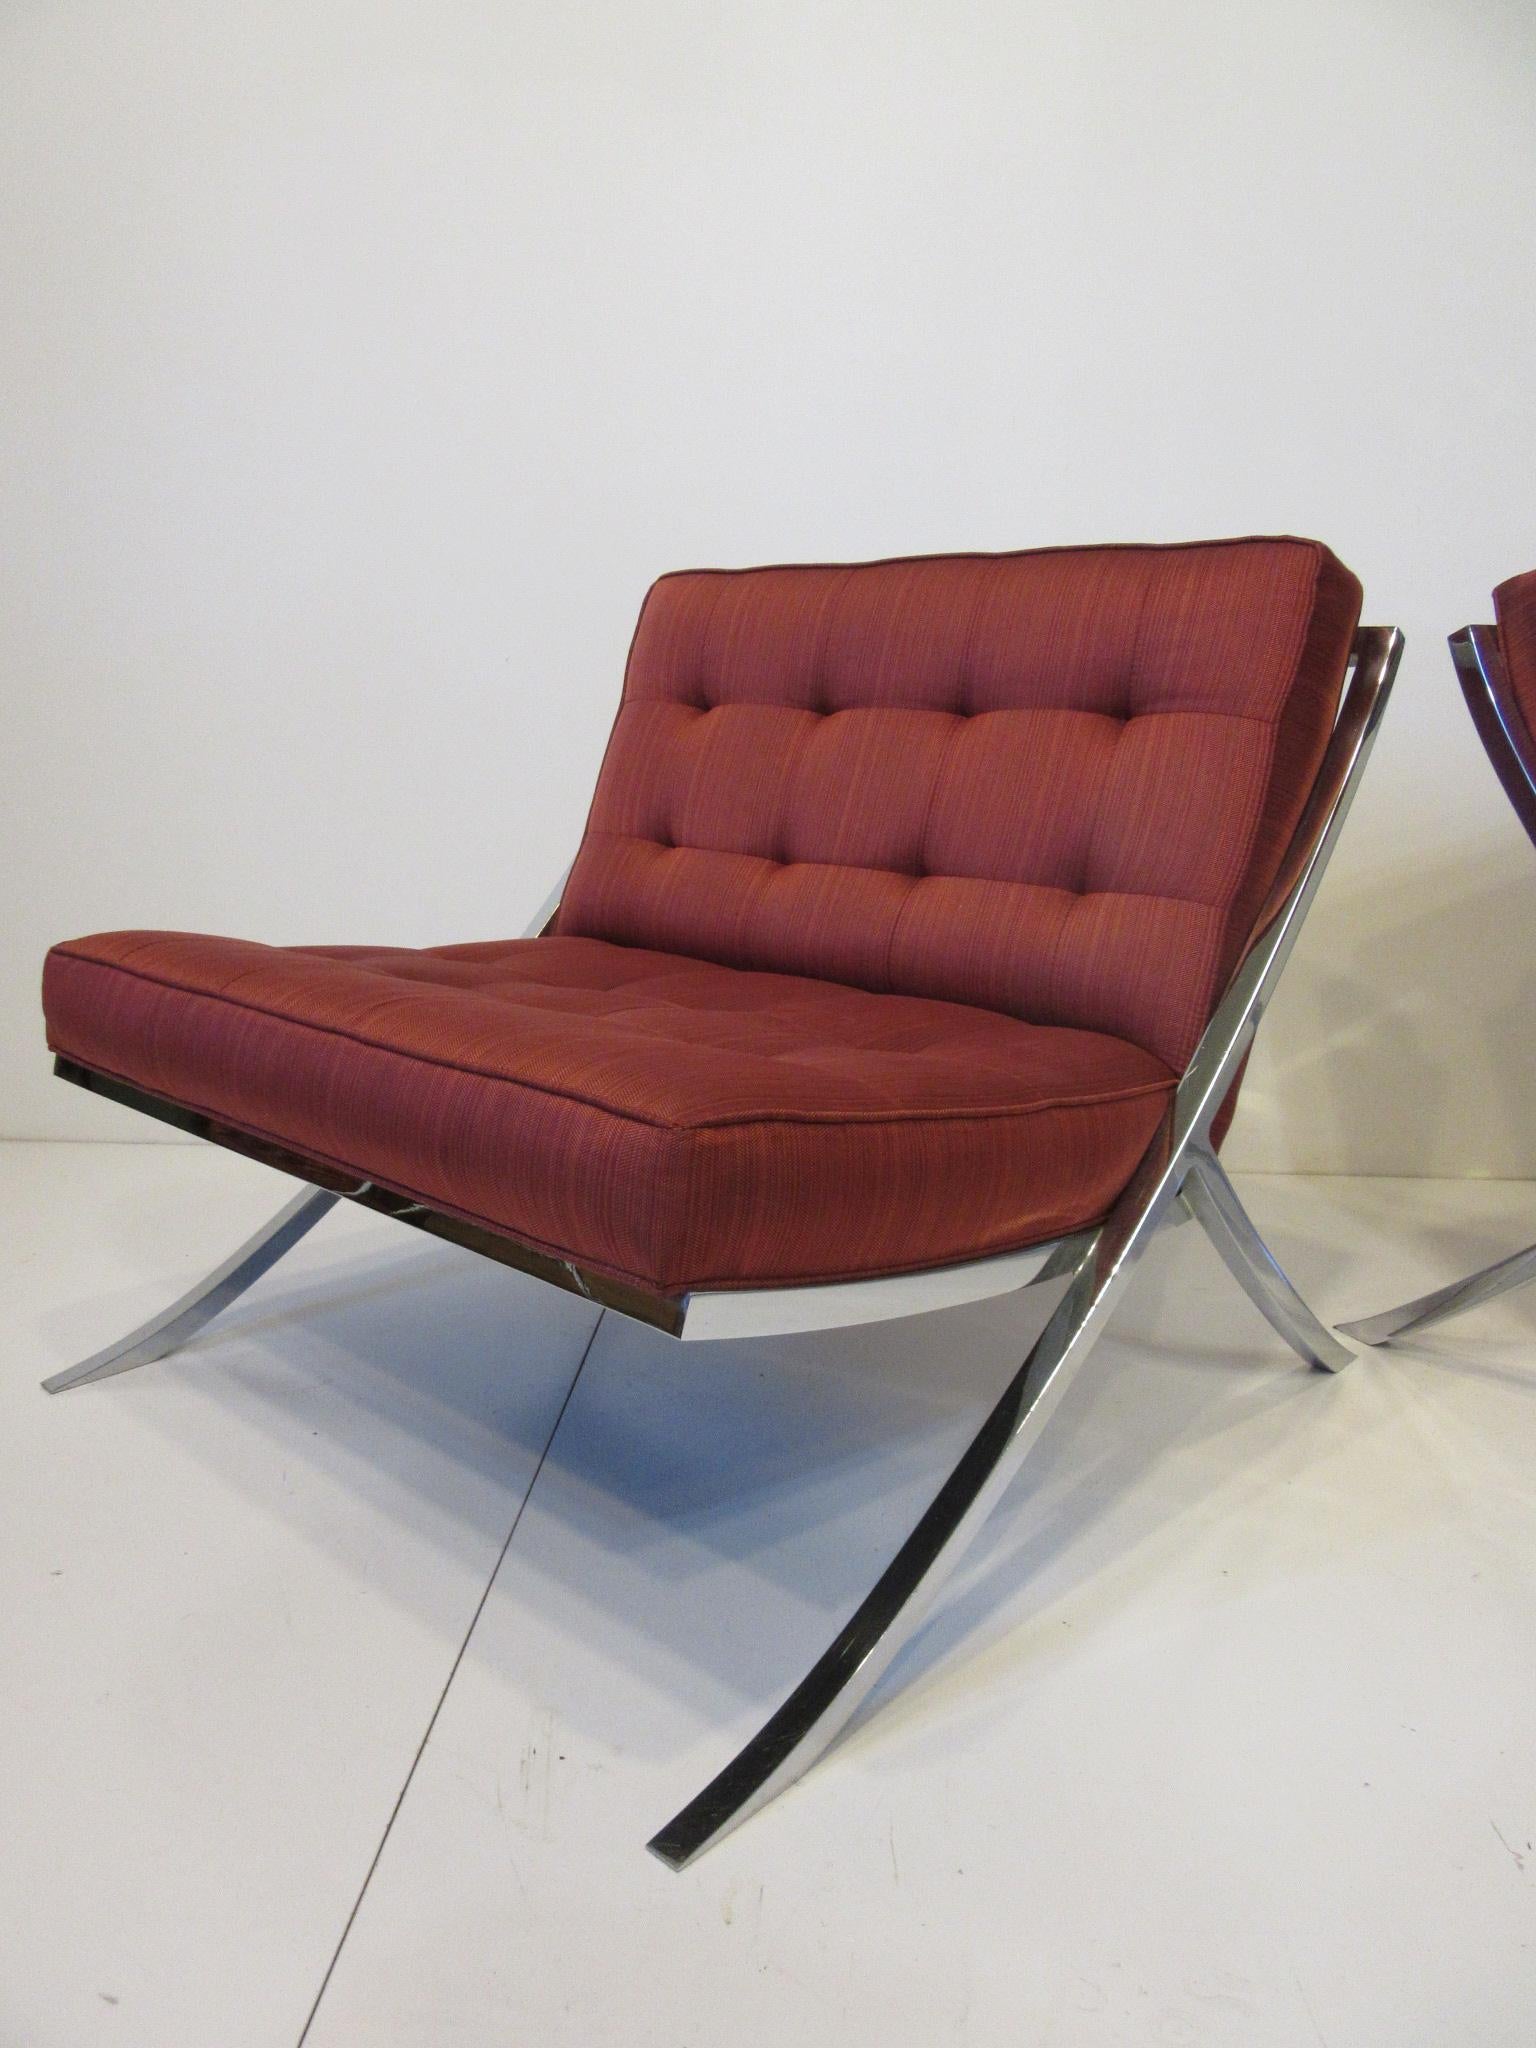 1970 Chromed Upholstered Saber Leg Lounge Chairs in a Knoll Barcelona Style   2